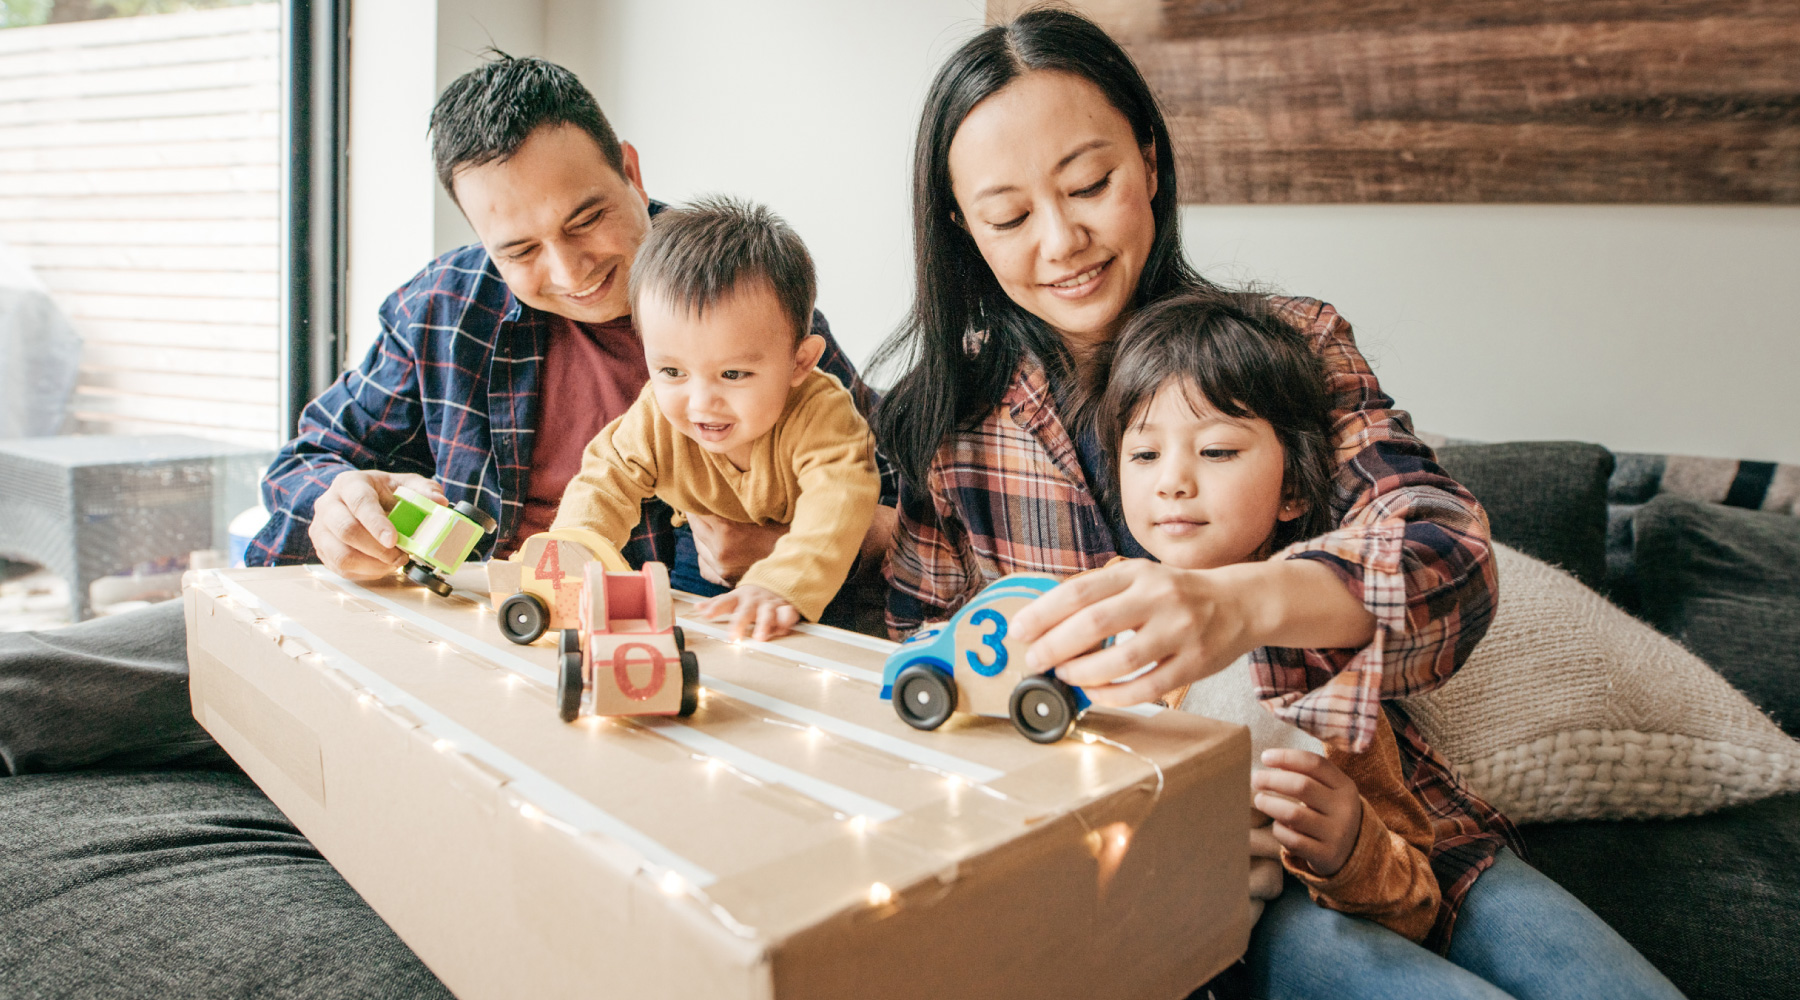 Family playing with wooden toy cars